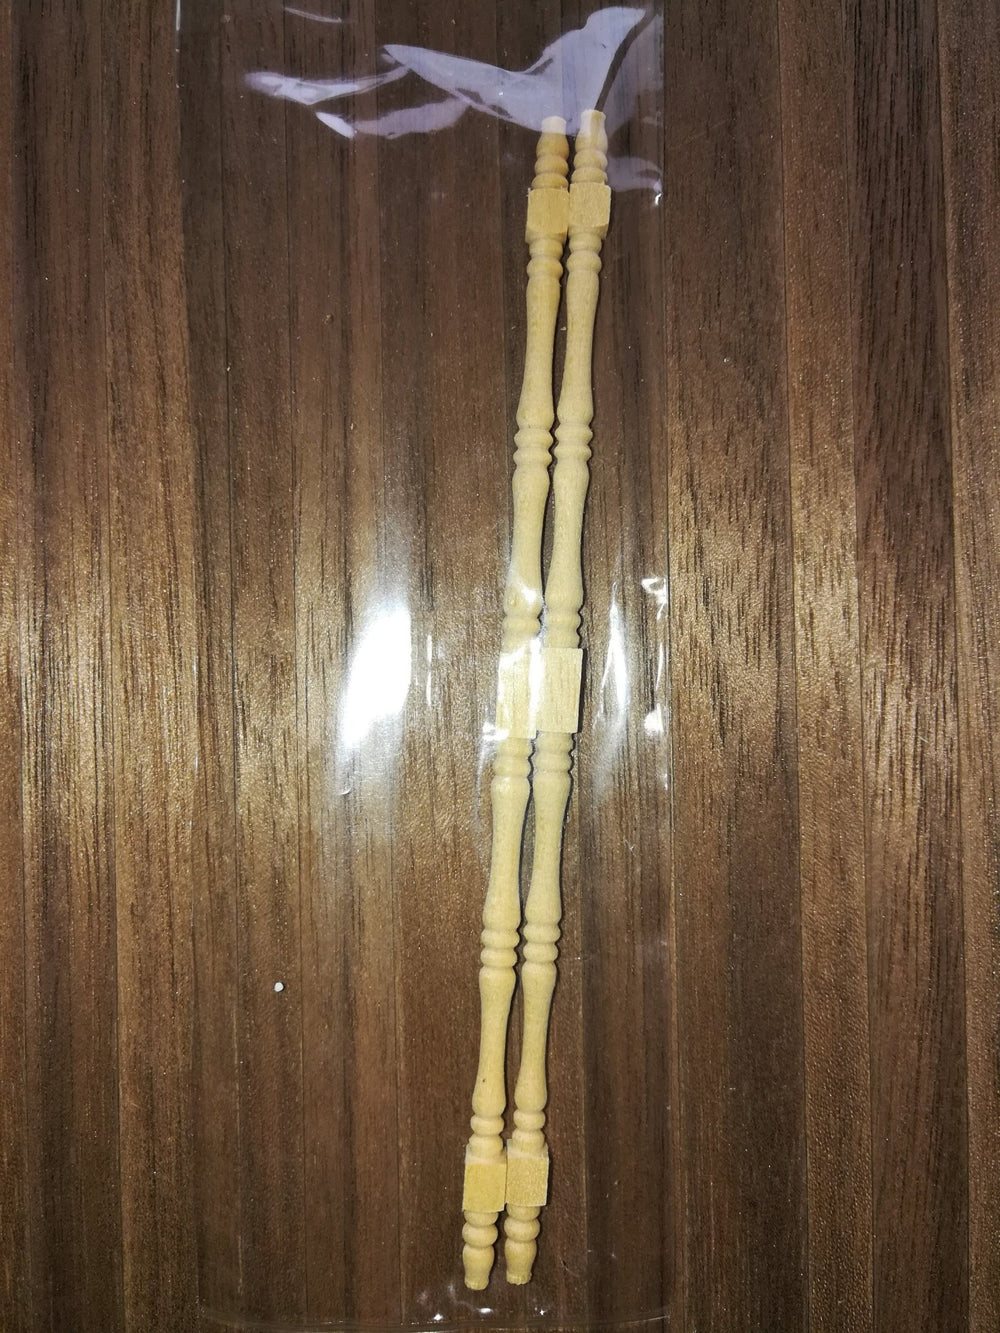 Dollhouse Miniature Spindles Tall Wood for Building 2 Pieces 1:12 Scale 4 3/4" Long - Miniature Crush